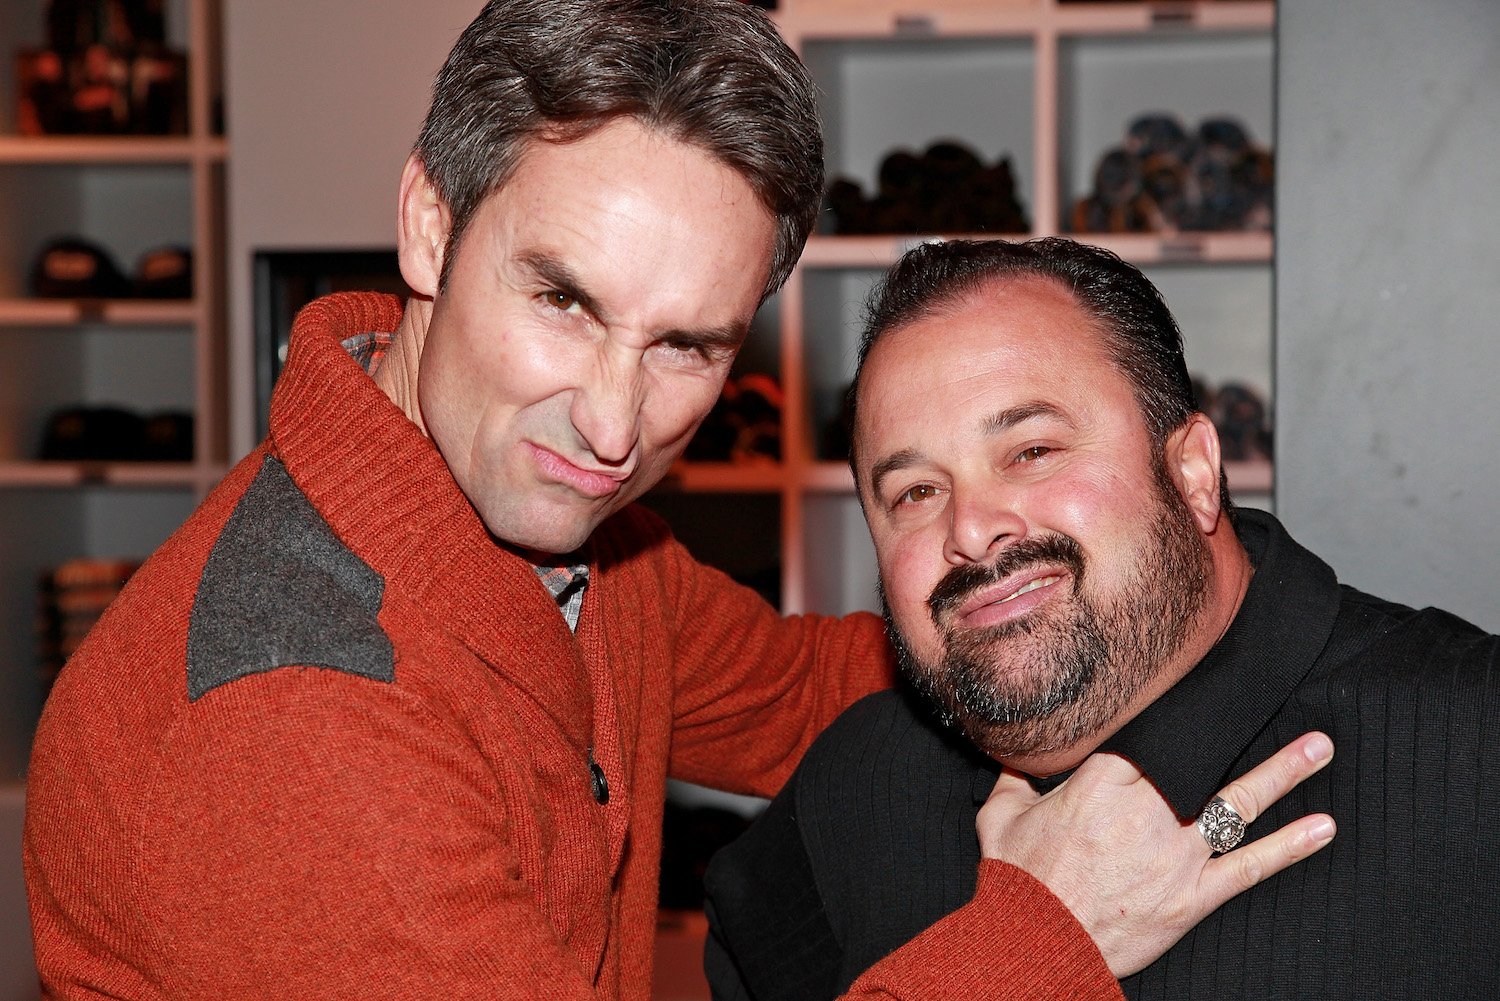 Mike Wolfe and Frank Fritz from 'American Pickers' posing together